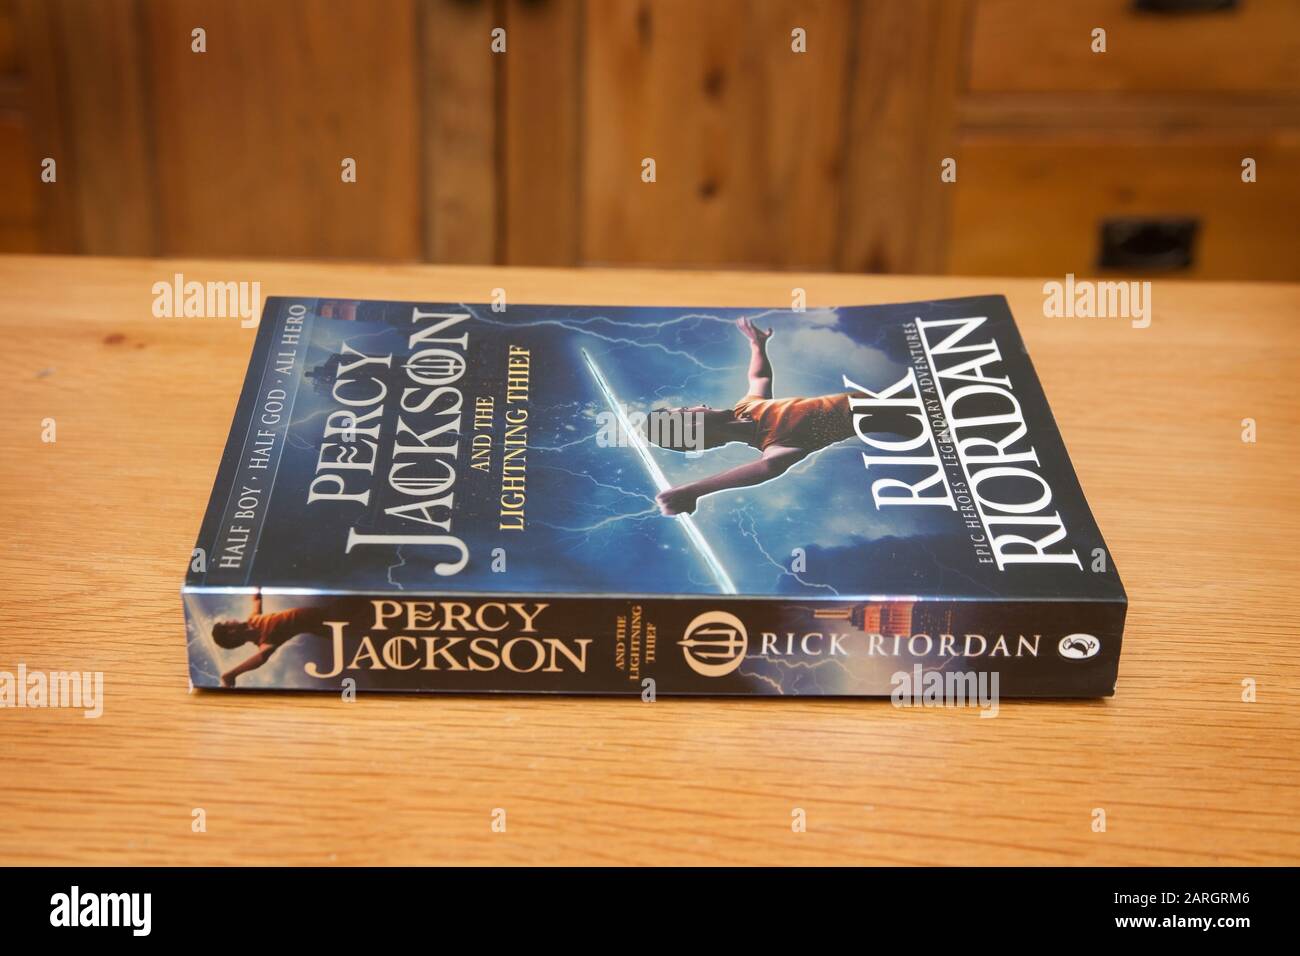 The book, Percy Jackson and the Lightning Thief Stock Photo - Alamy